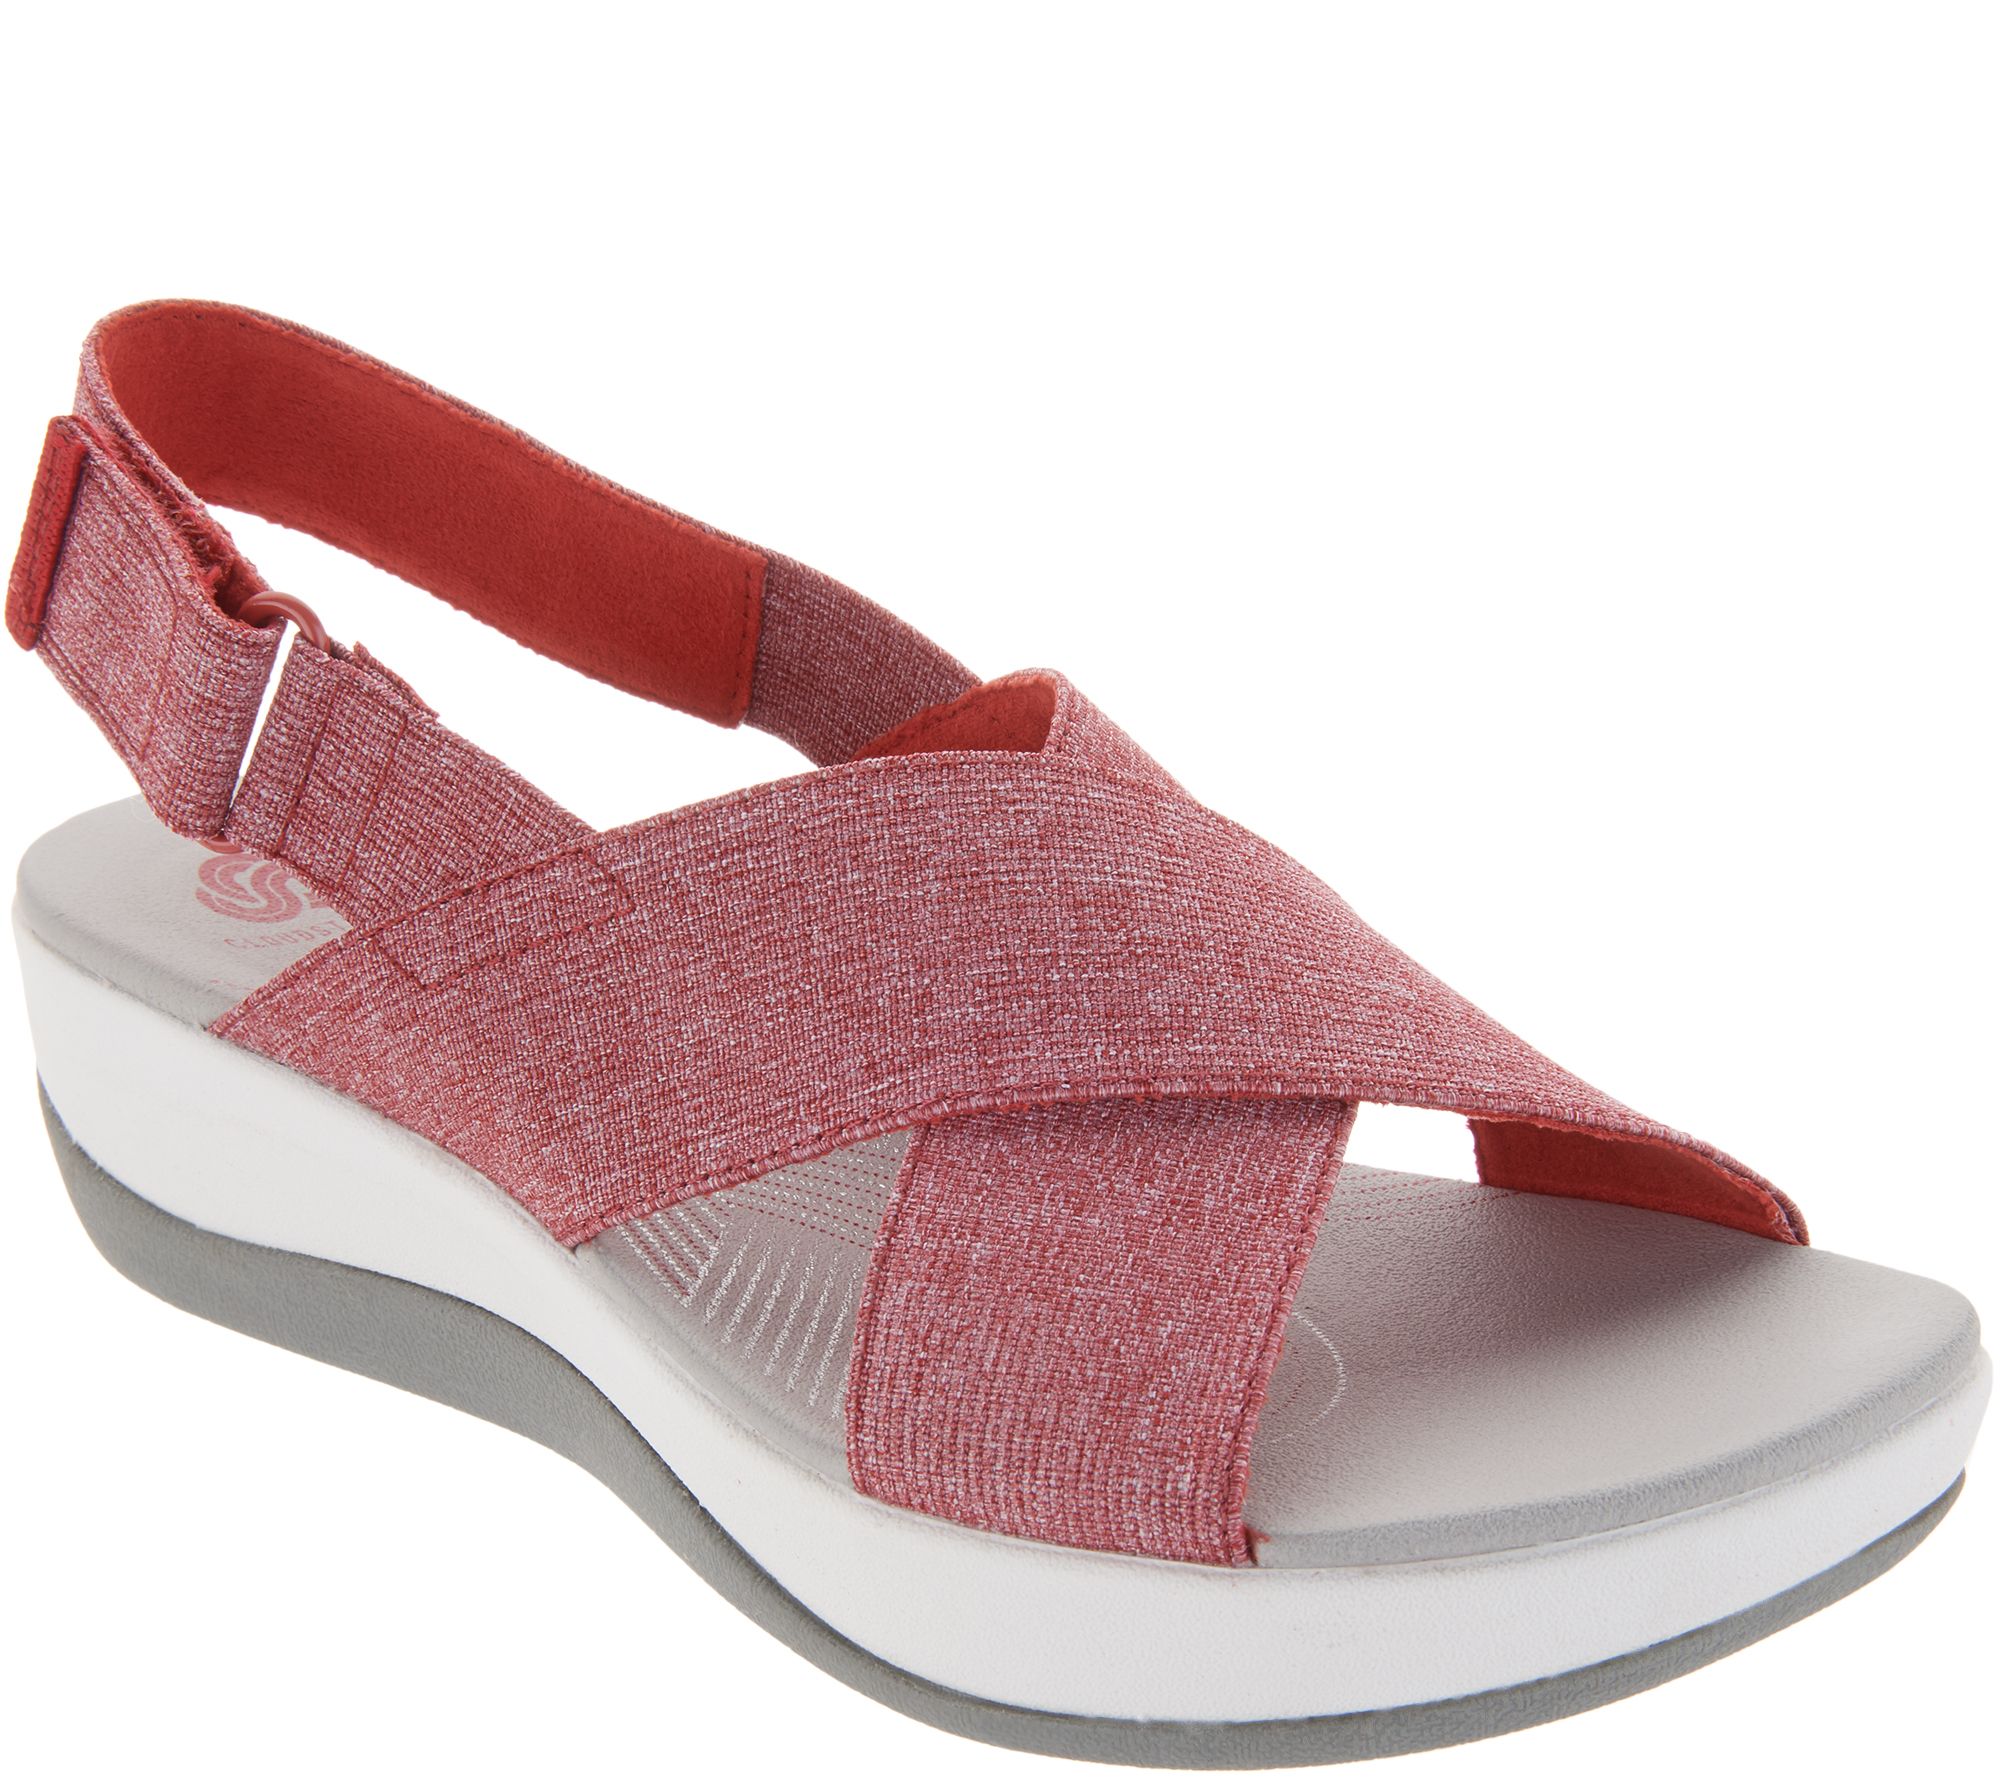 CLOUDSTEPPERS by Clarks Adjustable Sandals - Arla Kaydin - QVC.com